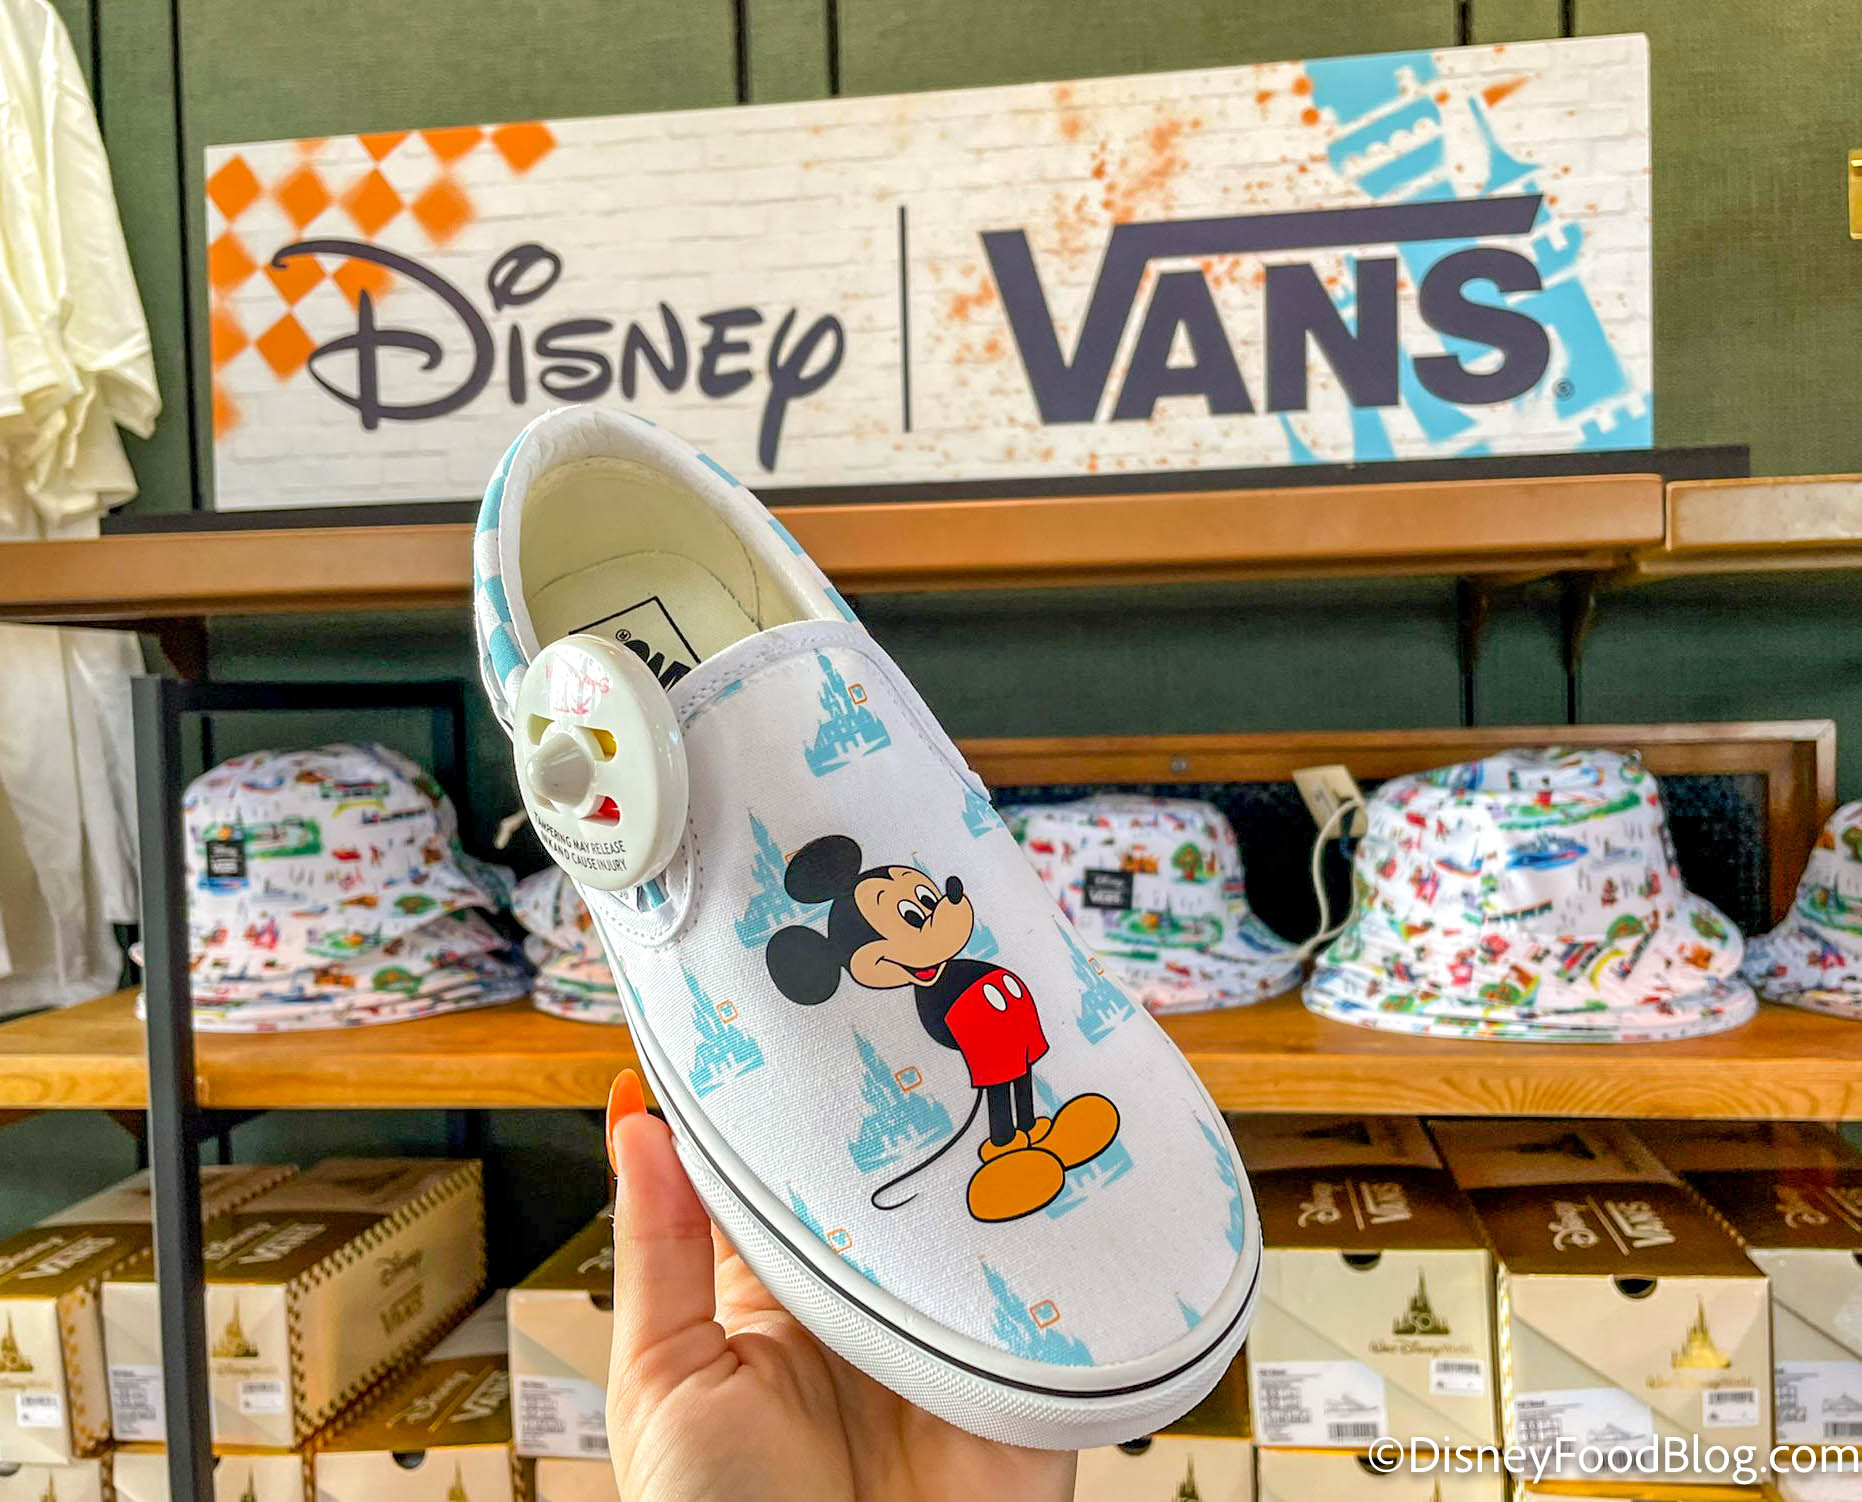 NEW 50th Anniversary Vans Shoes Are Now in Disney World! | disney food blog